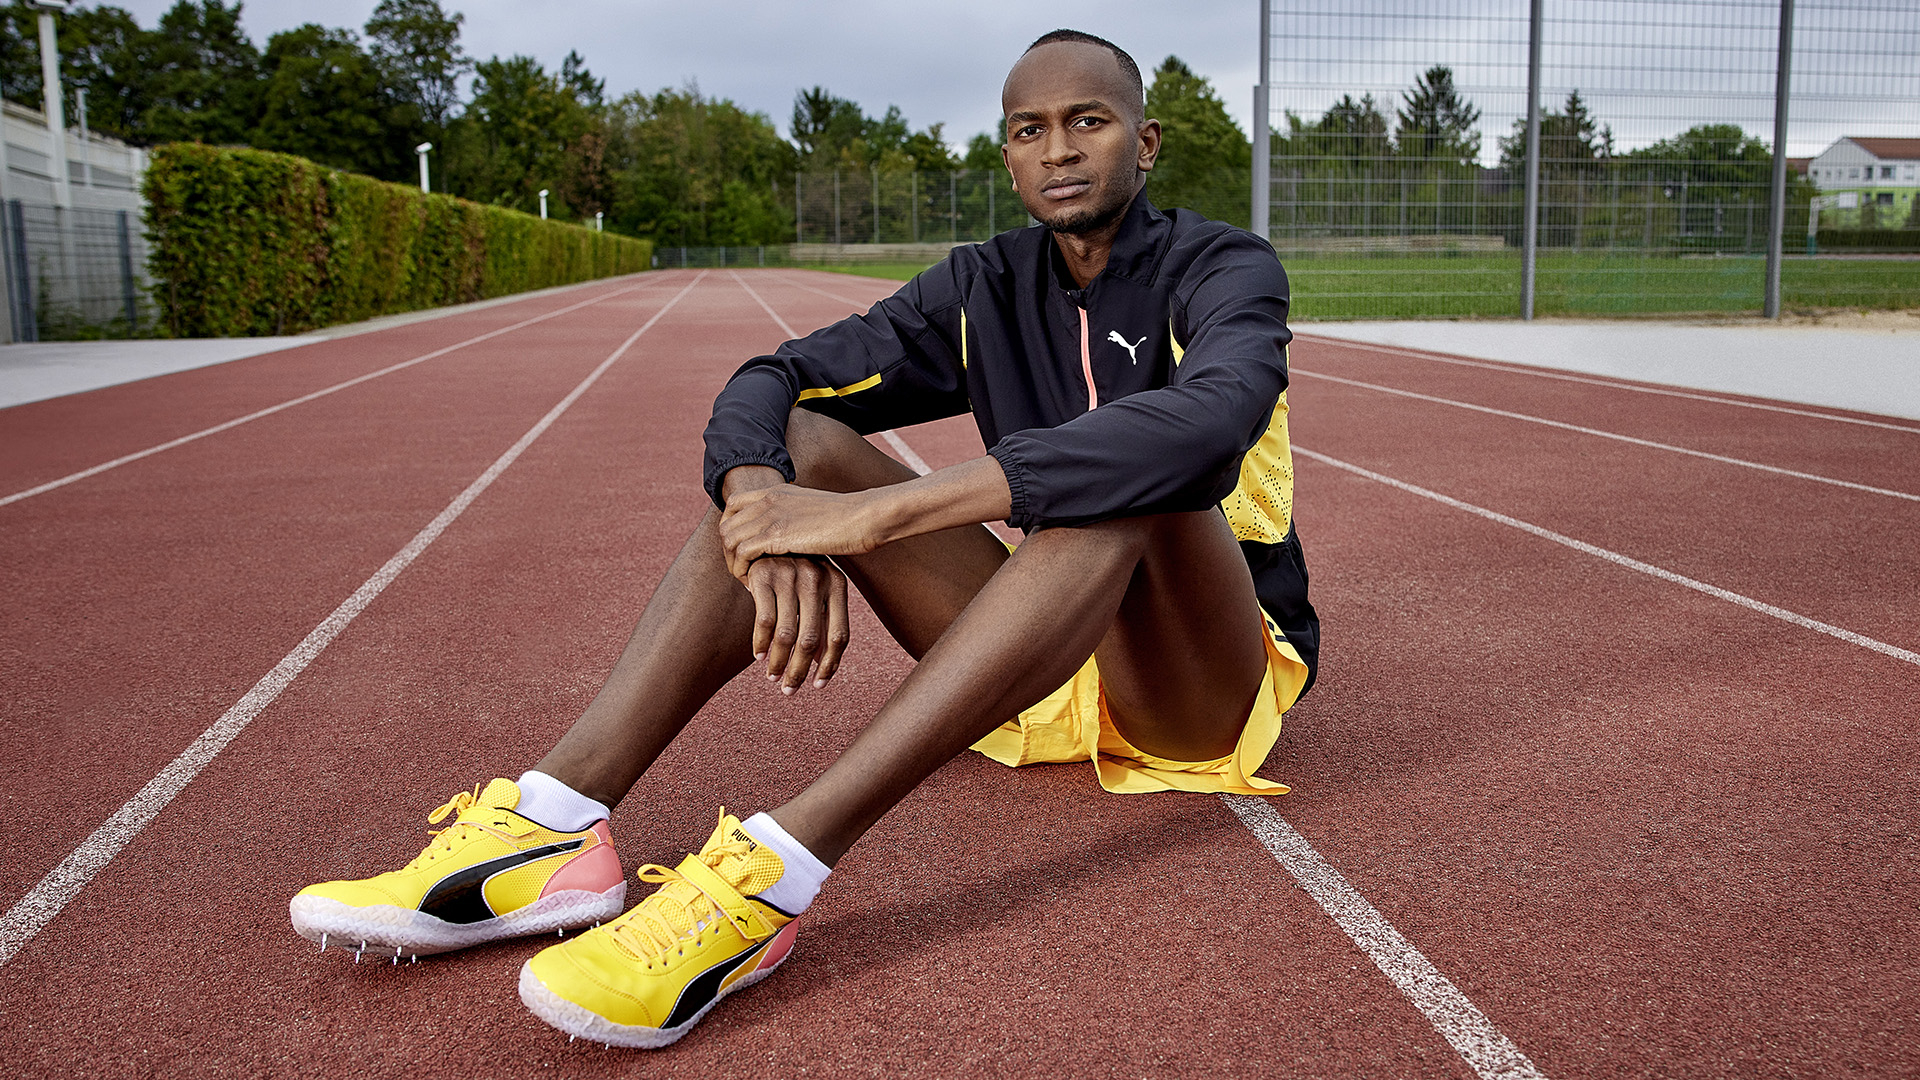 PUMA Signs Mutaz Essa Barshim, of the Most Successful High Jumpers of All Time | Business Wire